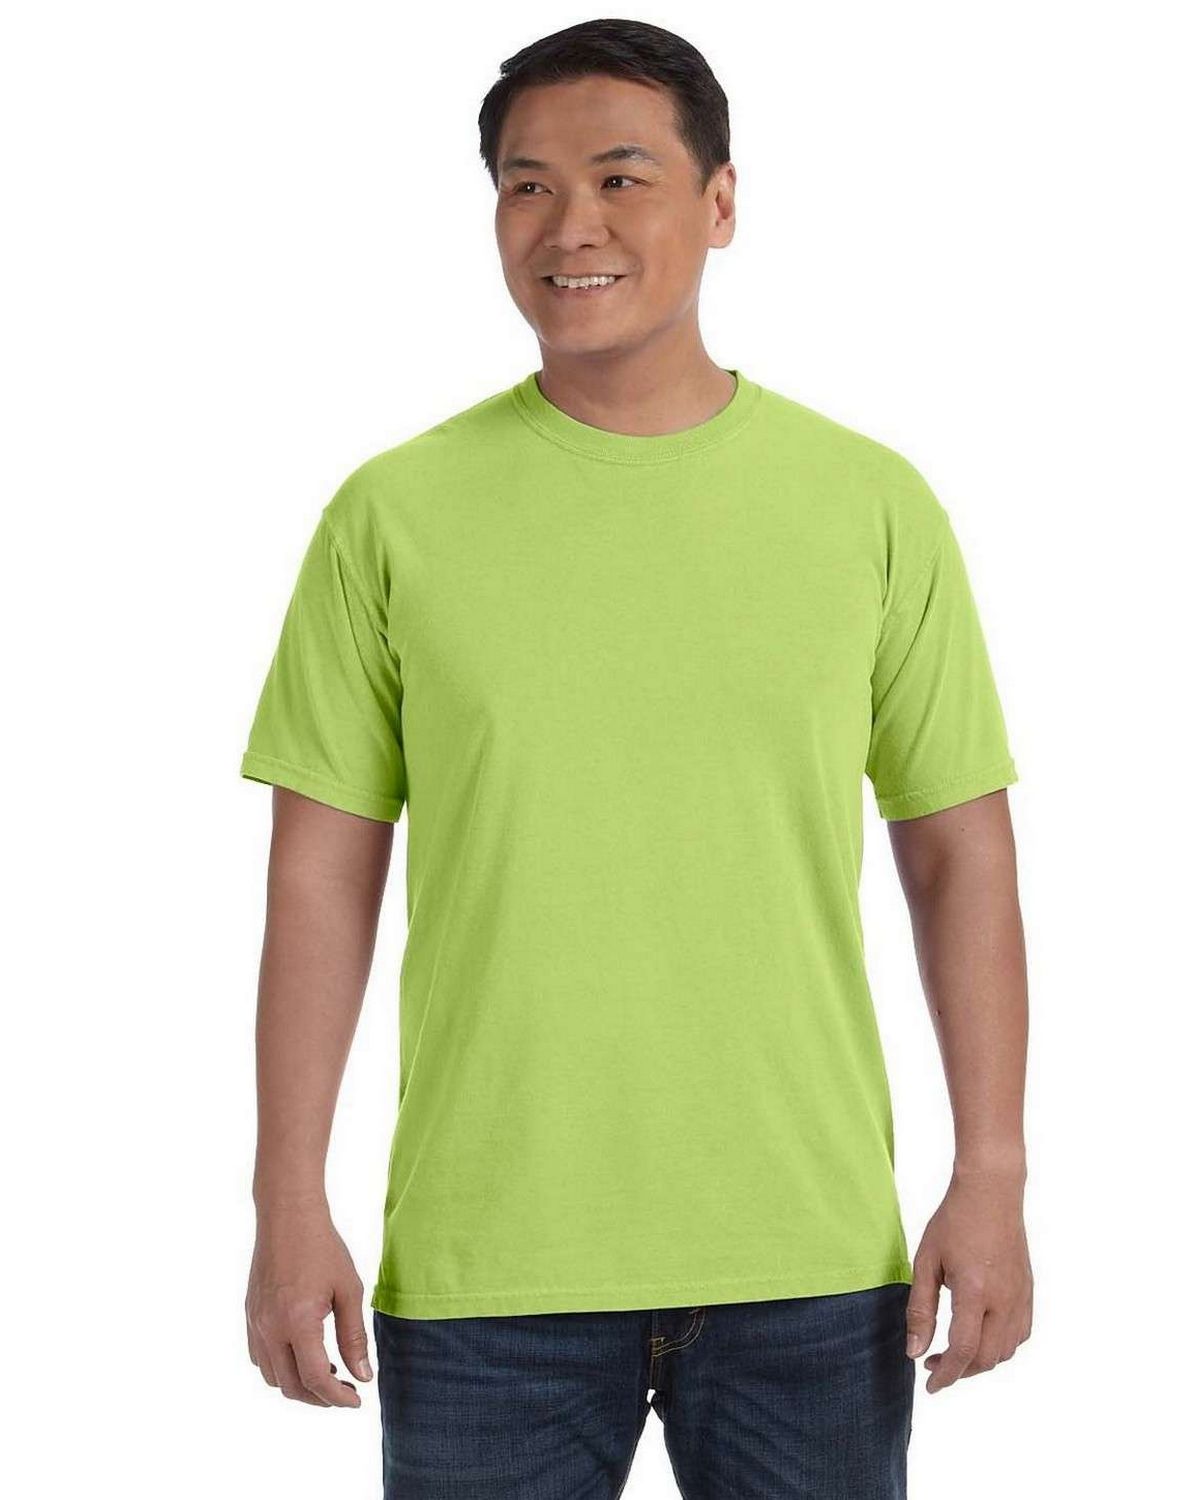 Size Chart for Comfort Colors C1717 Mens Ringspun Garment-Dyed T-Shirt 